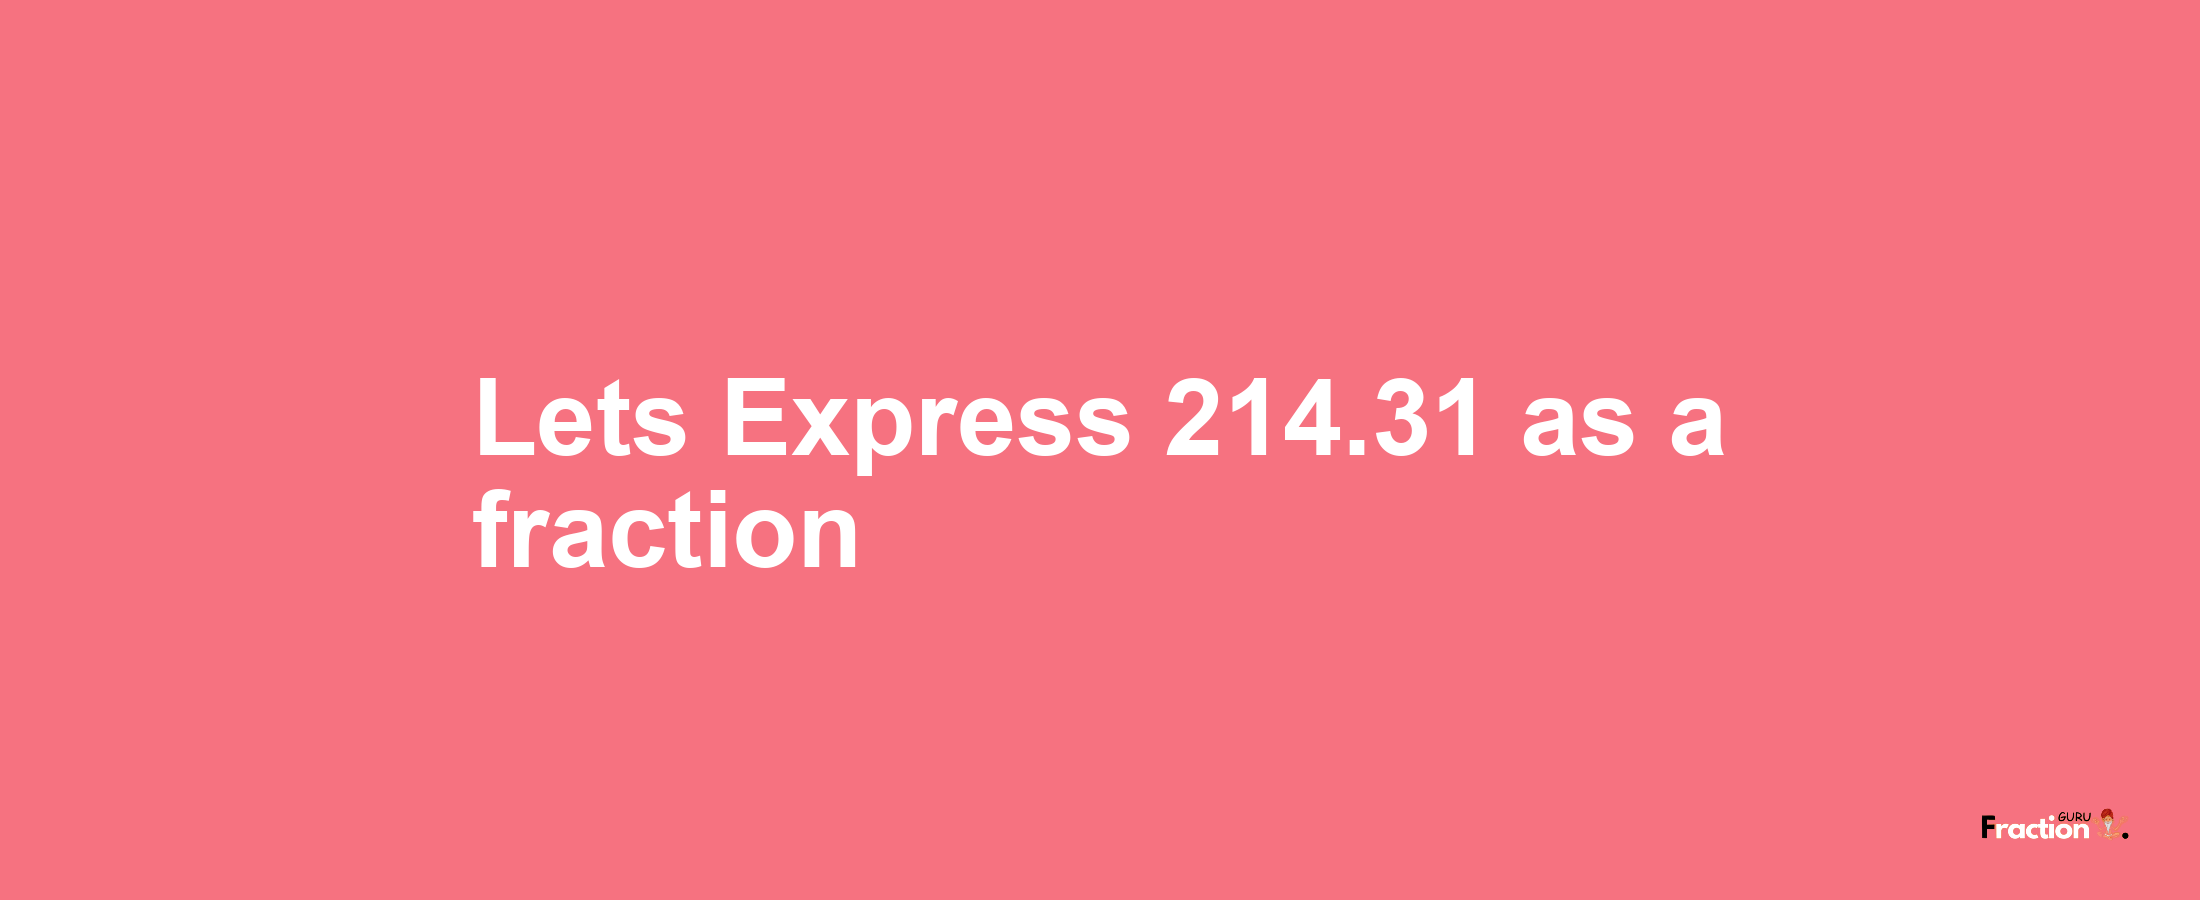 Lets Express 214.31 as afraction